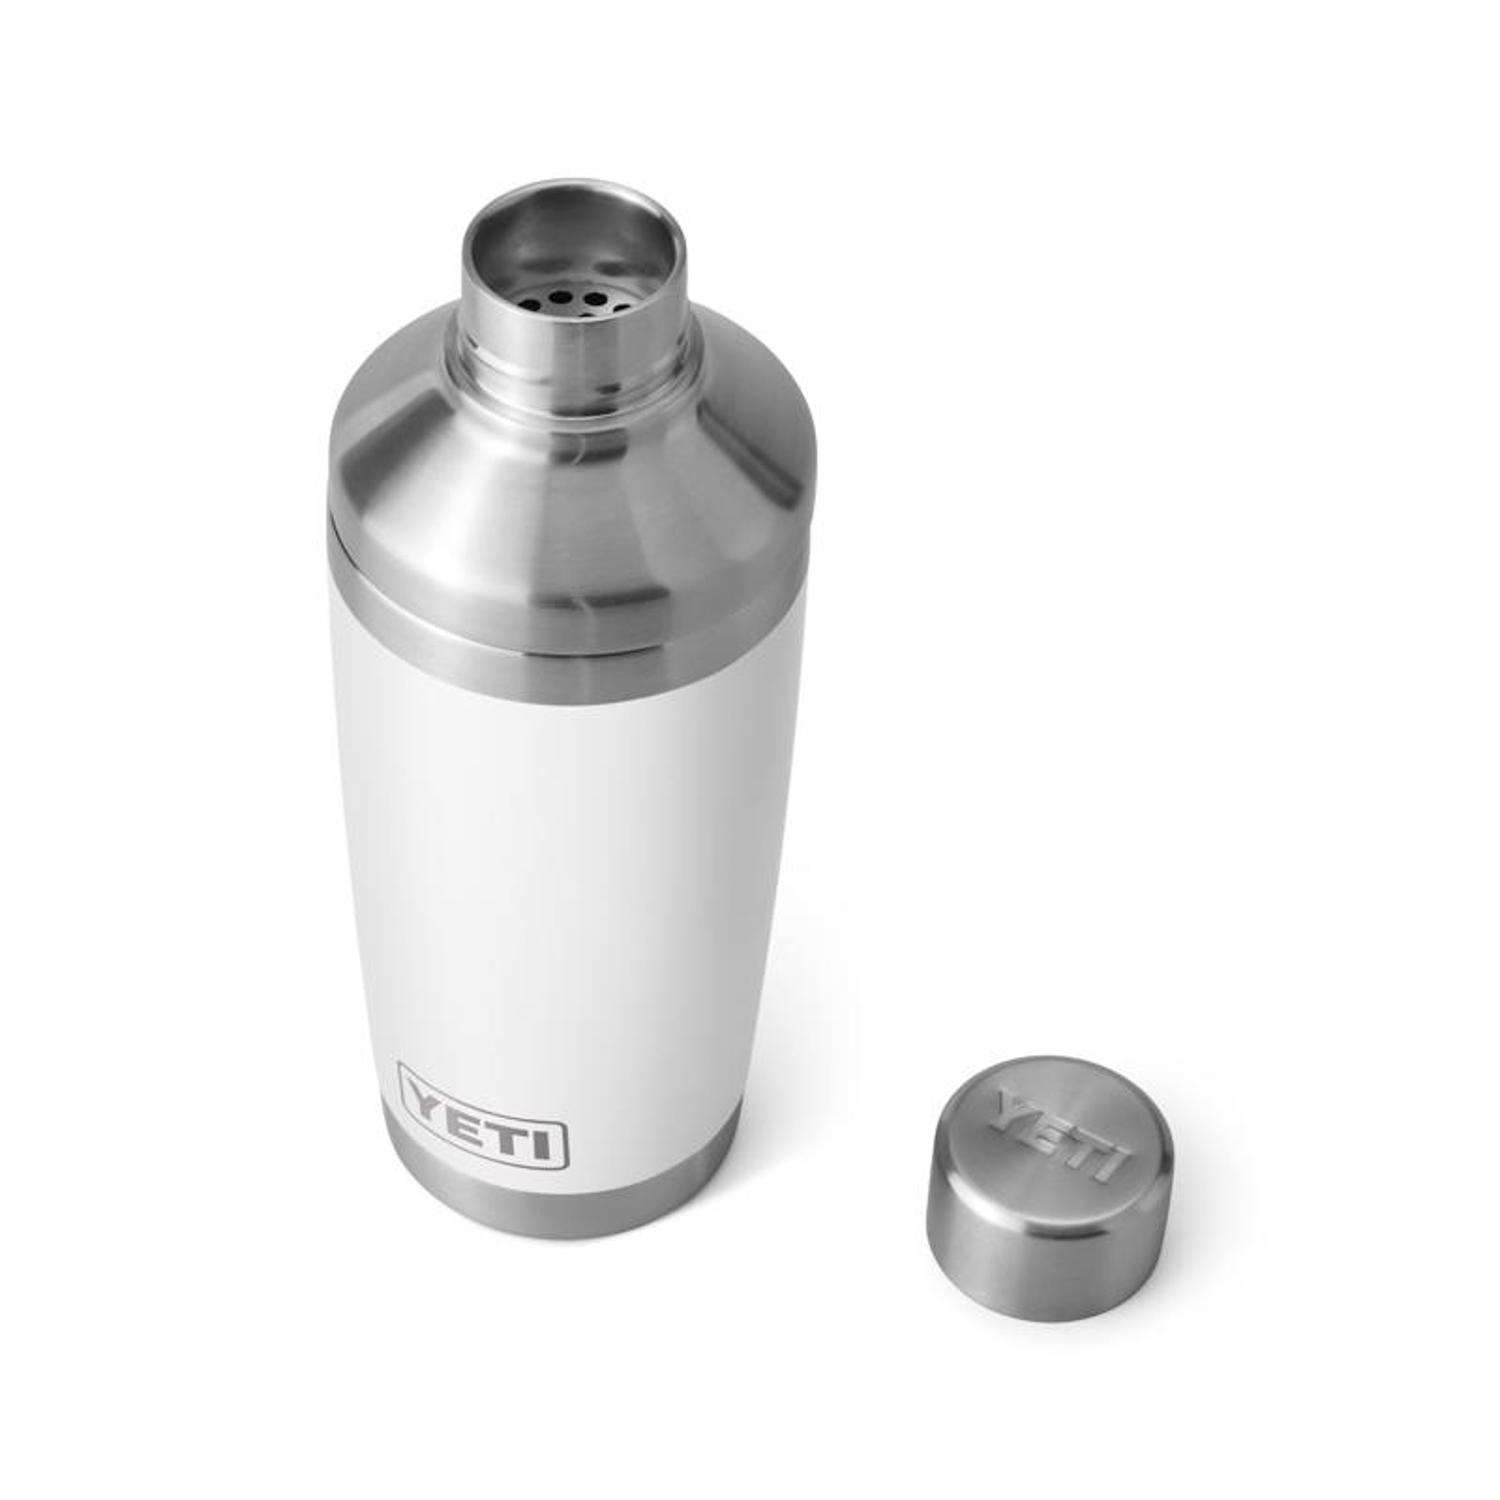 YETI Shaker 20 oz. Rambler Cocktail Shaker Stainless Steel NEW IN BOX -  household items - by owner - housewares sale 